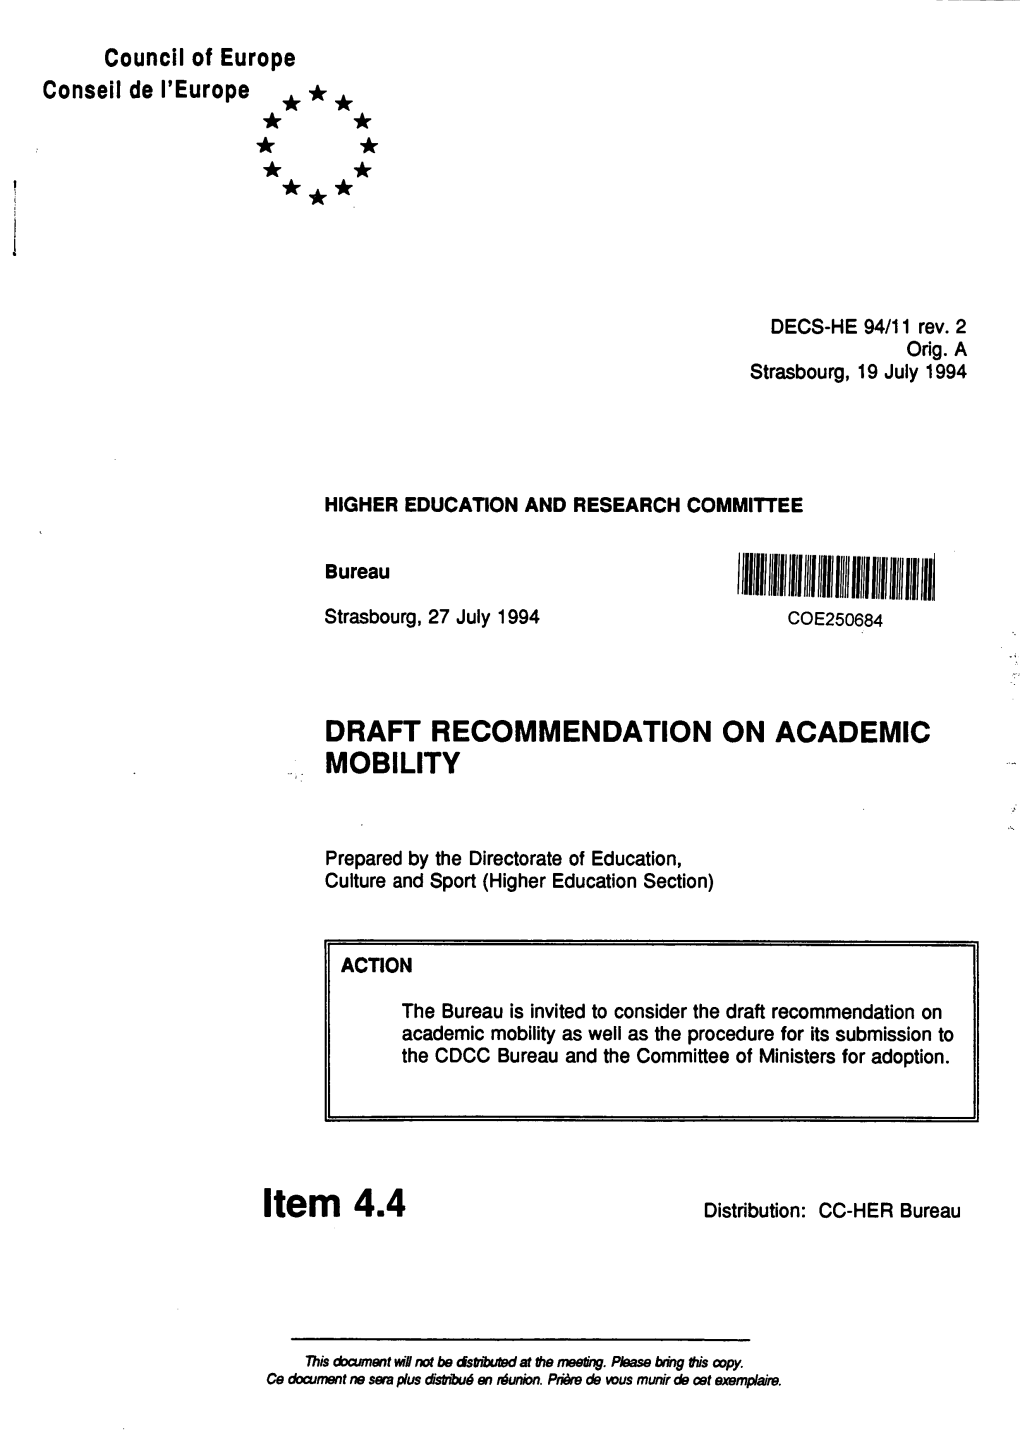 Draft Recommendation on Academic Mobility